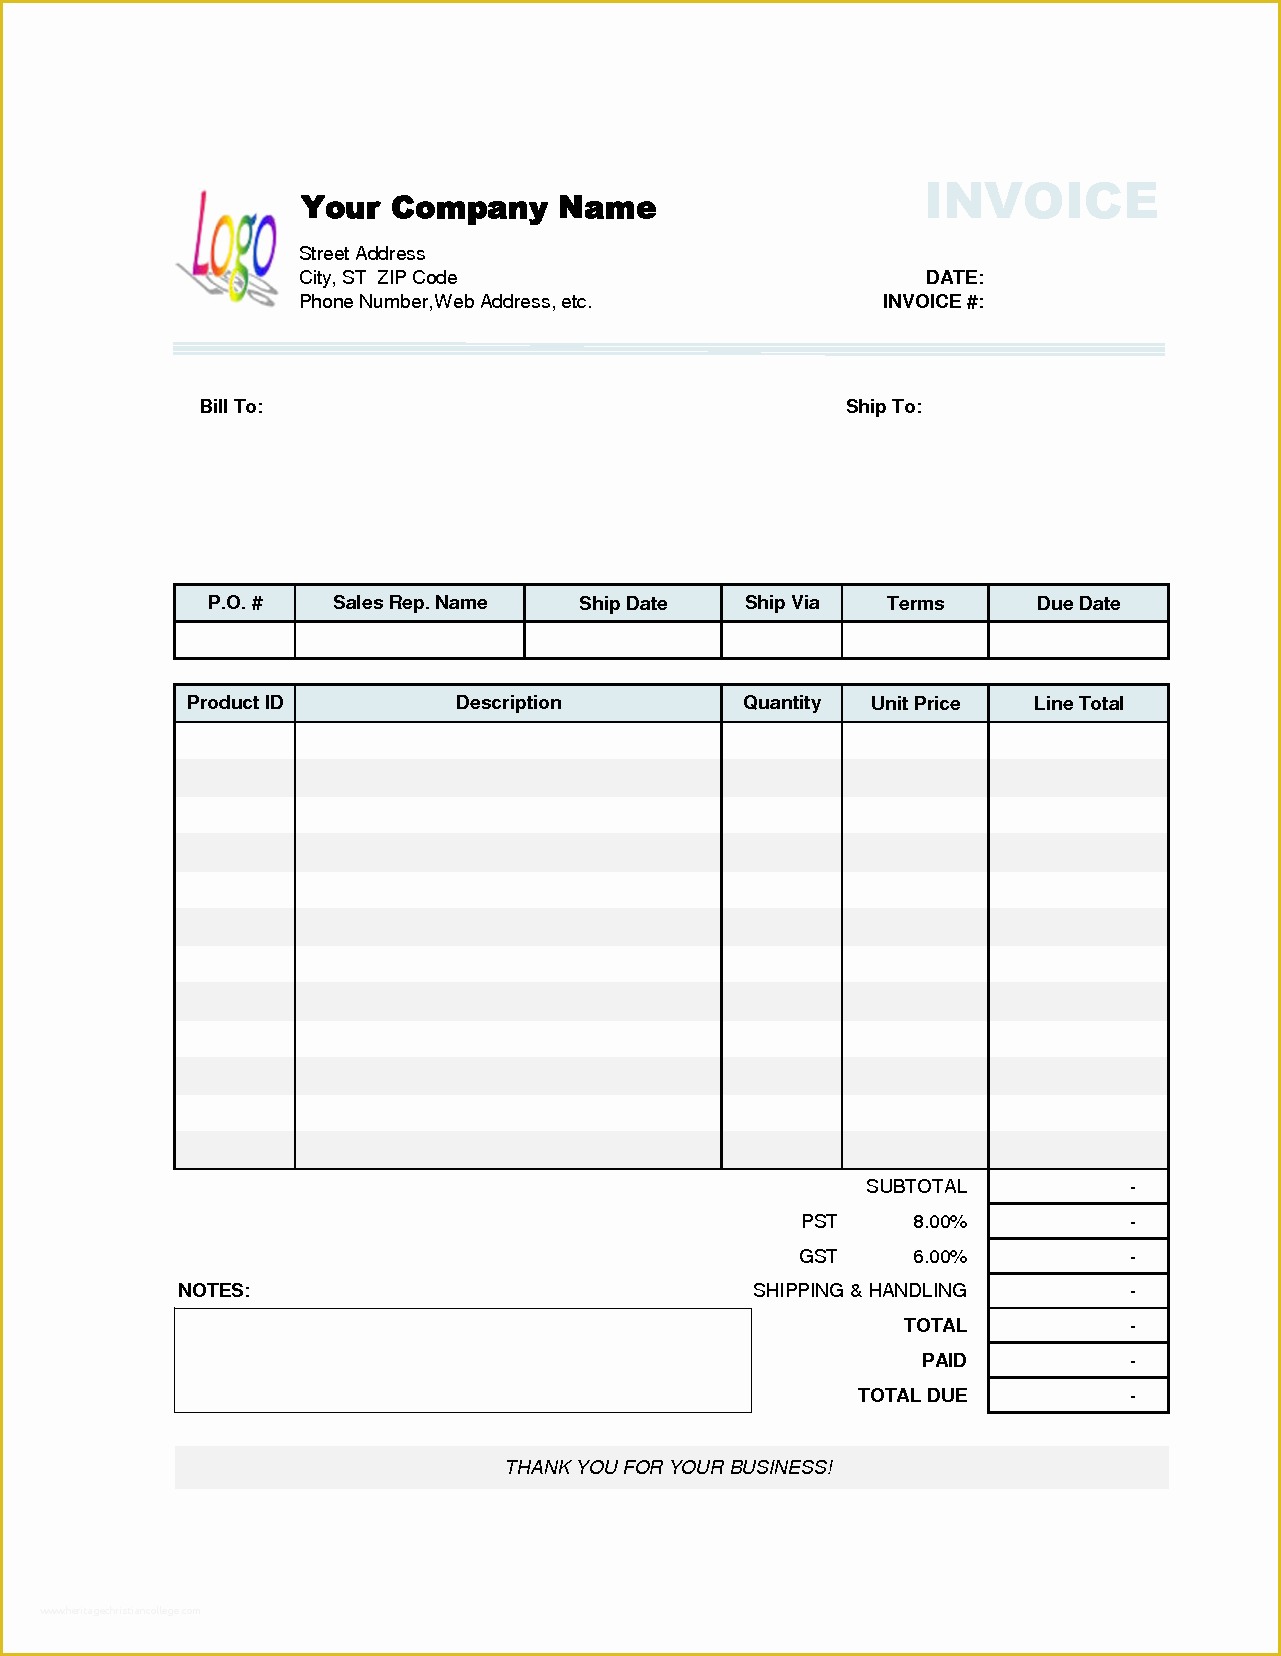 50 Free Trucking Invoices Templates | Heritagechristiancollege